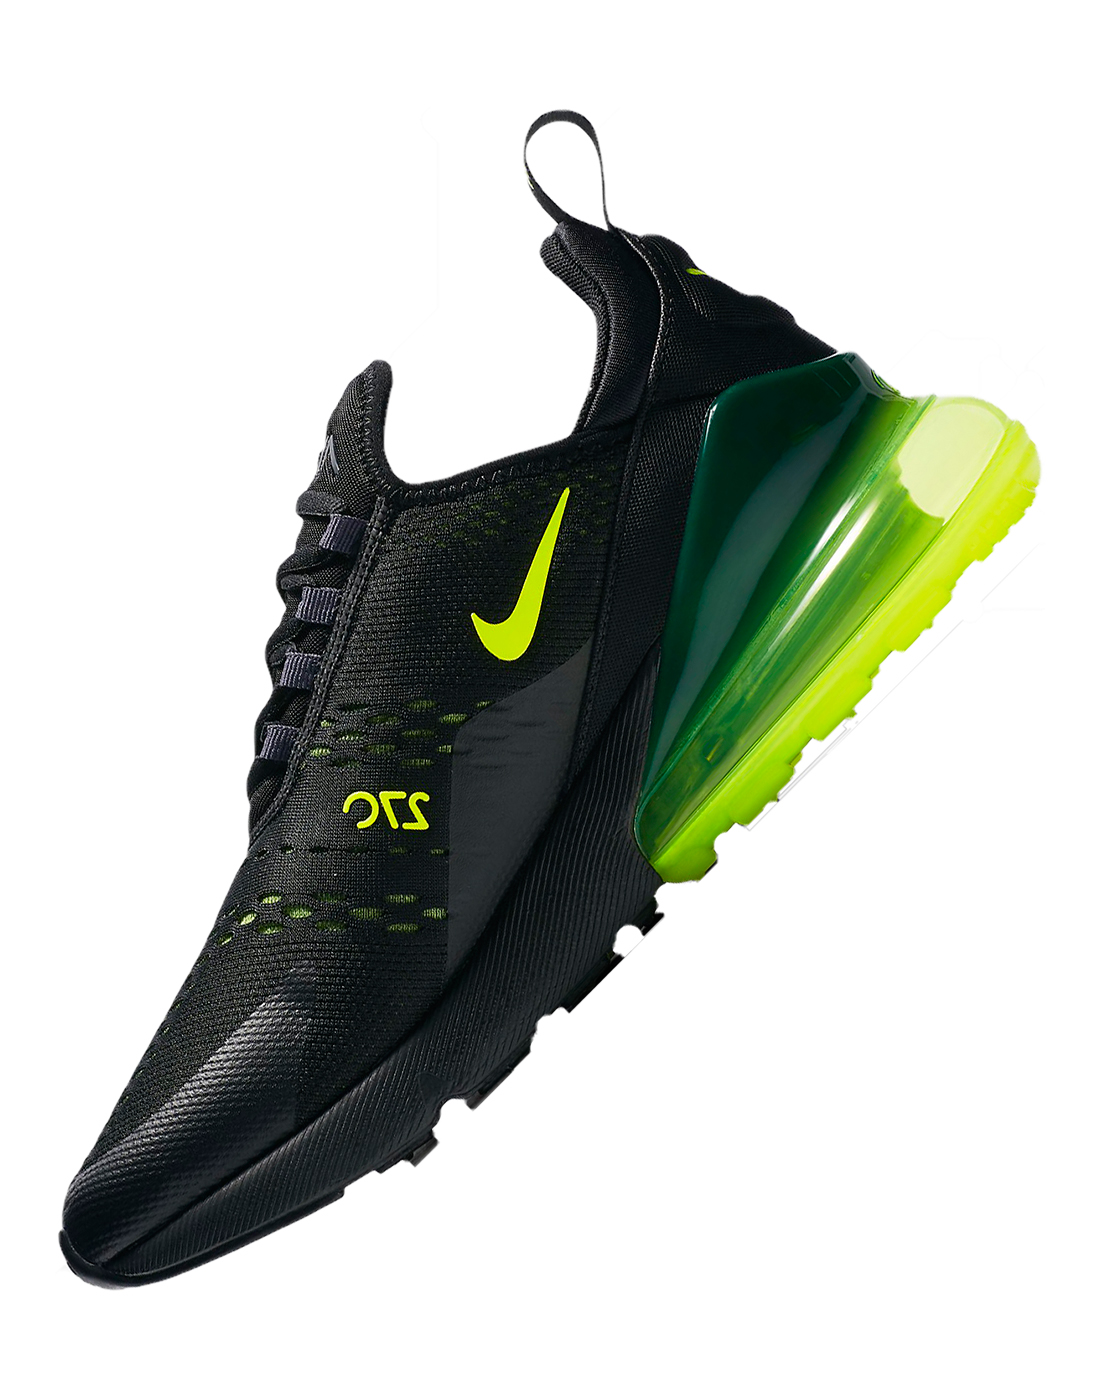 lime green and black air max 270